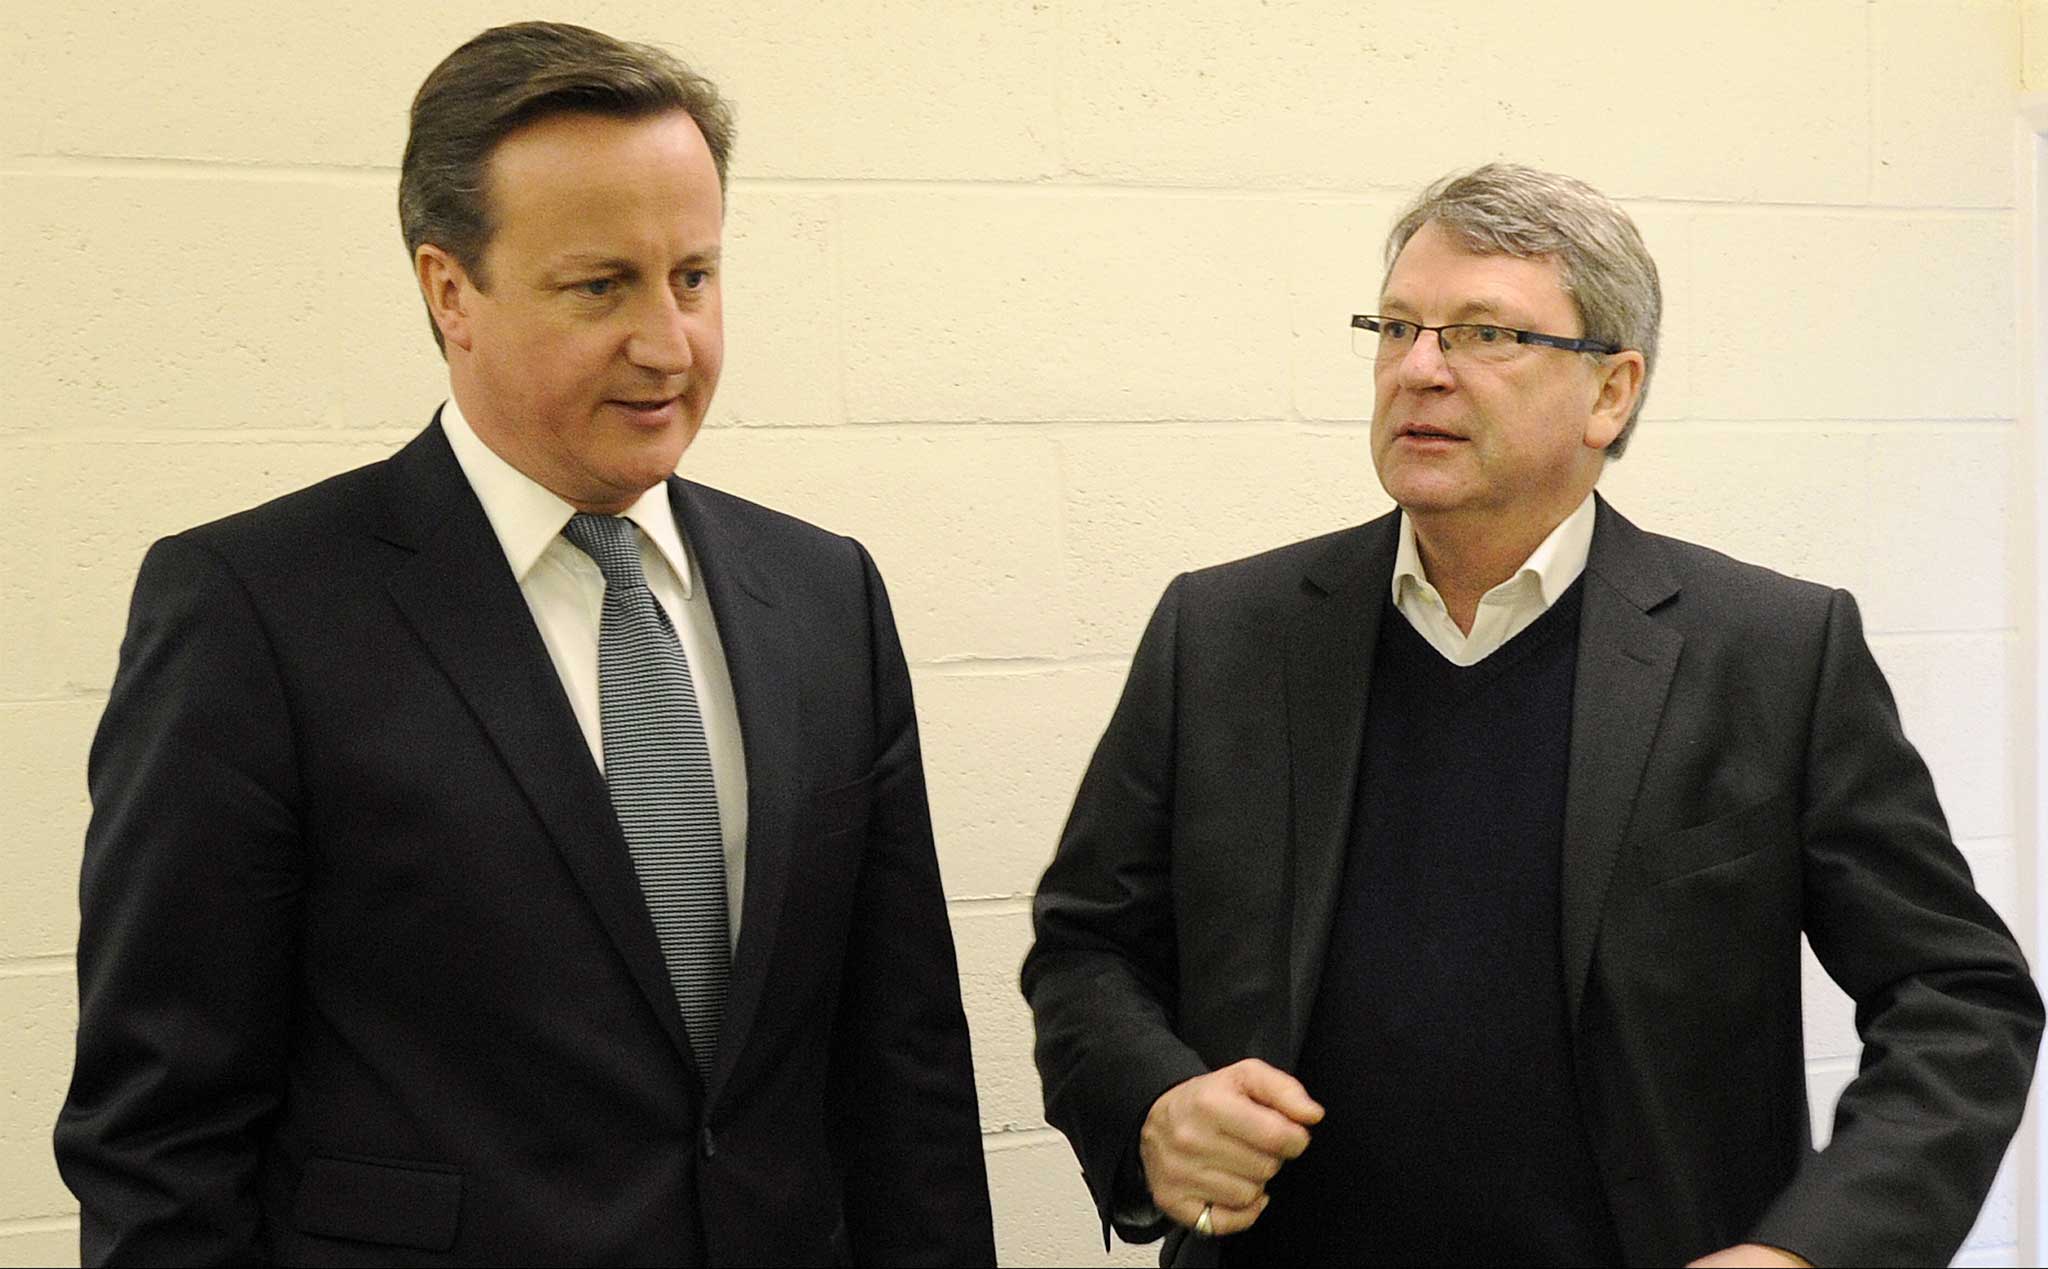 The Prime Minister with Lynton Crosby